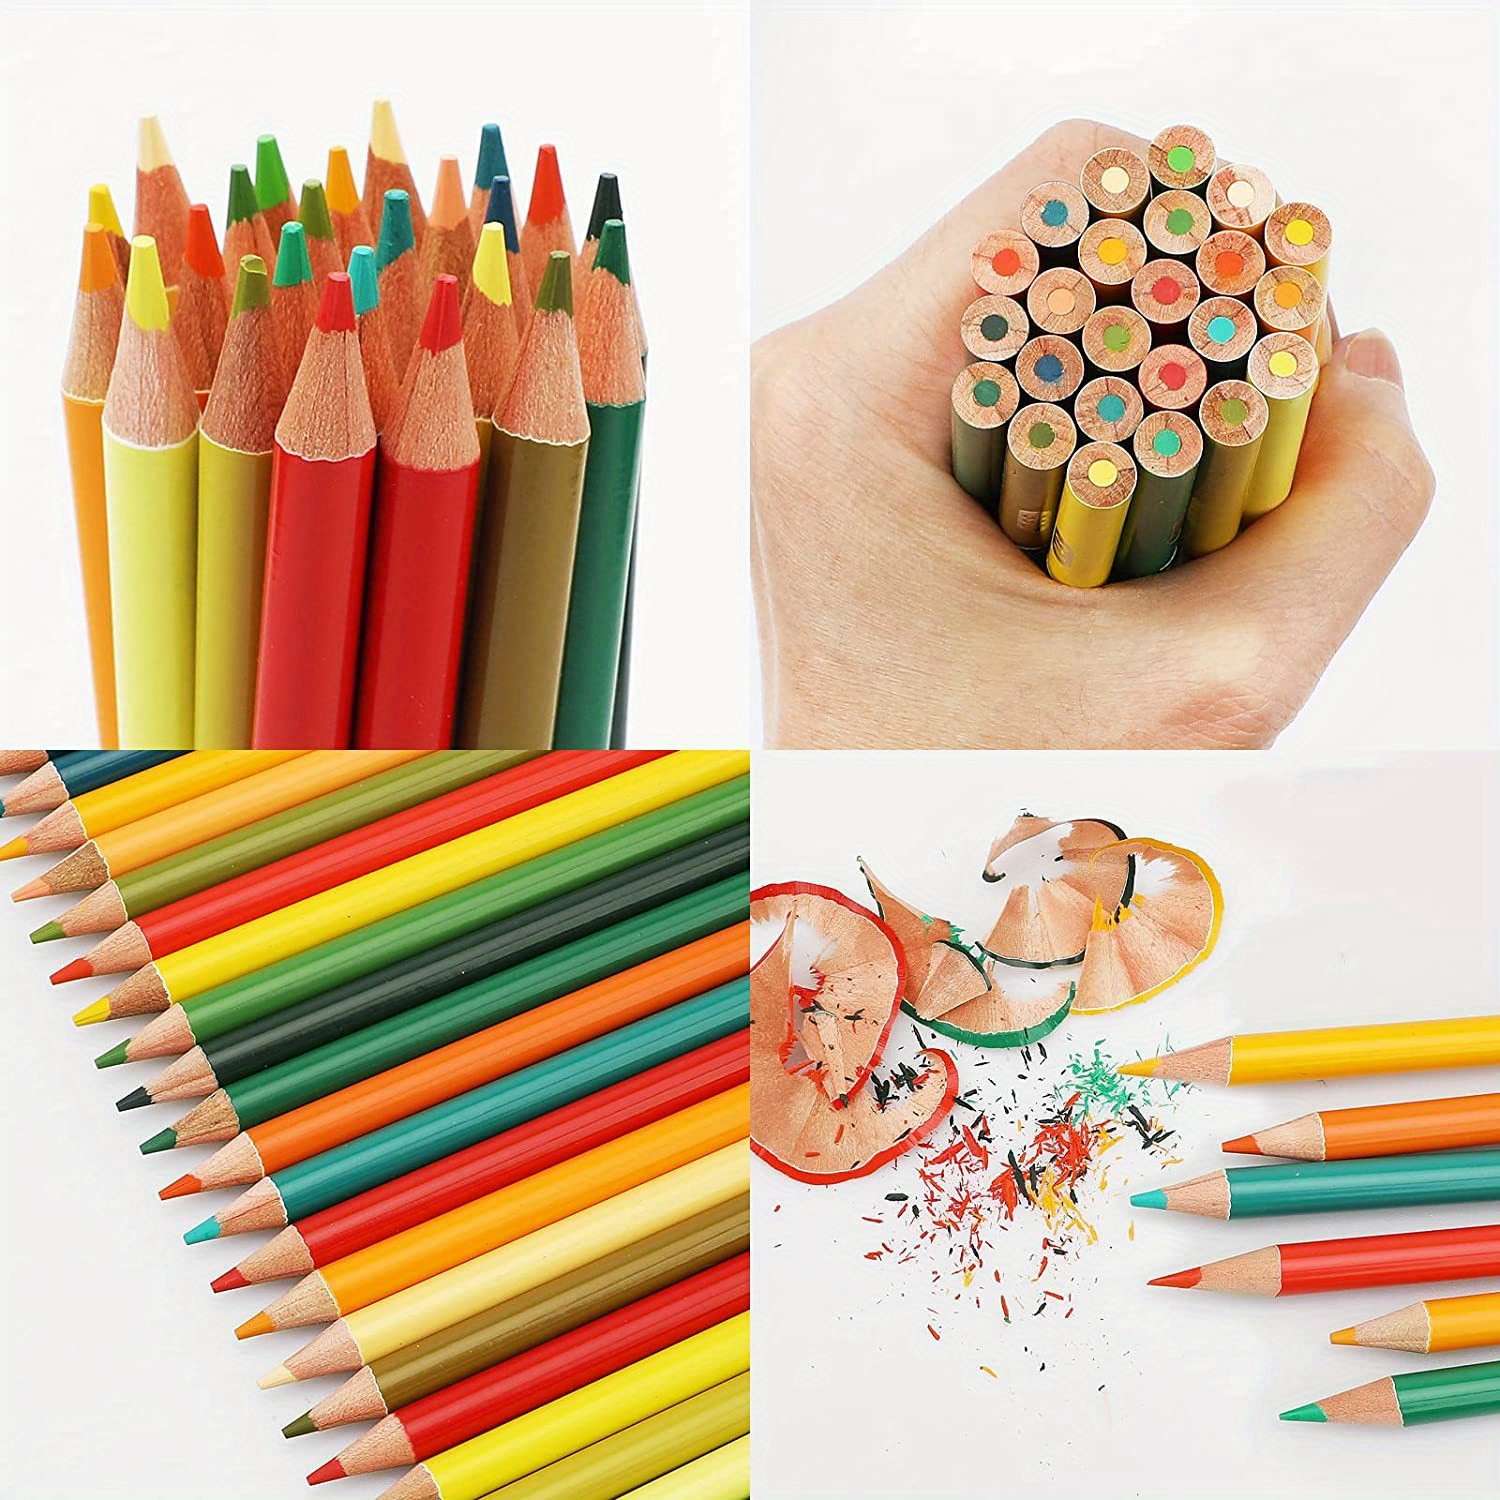 240 Colors Colored Pencils Professional Drawing Pencil Pencils For Artisit Drawing  Sketch Art Supplies Andstal - Wooden Colored Pencils - AliExpress